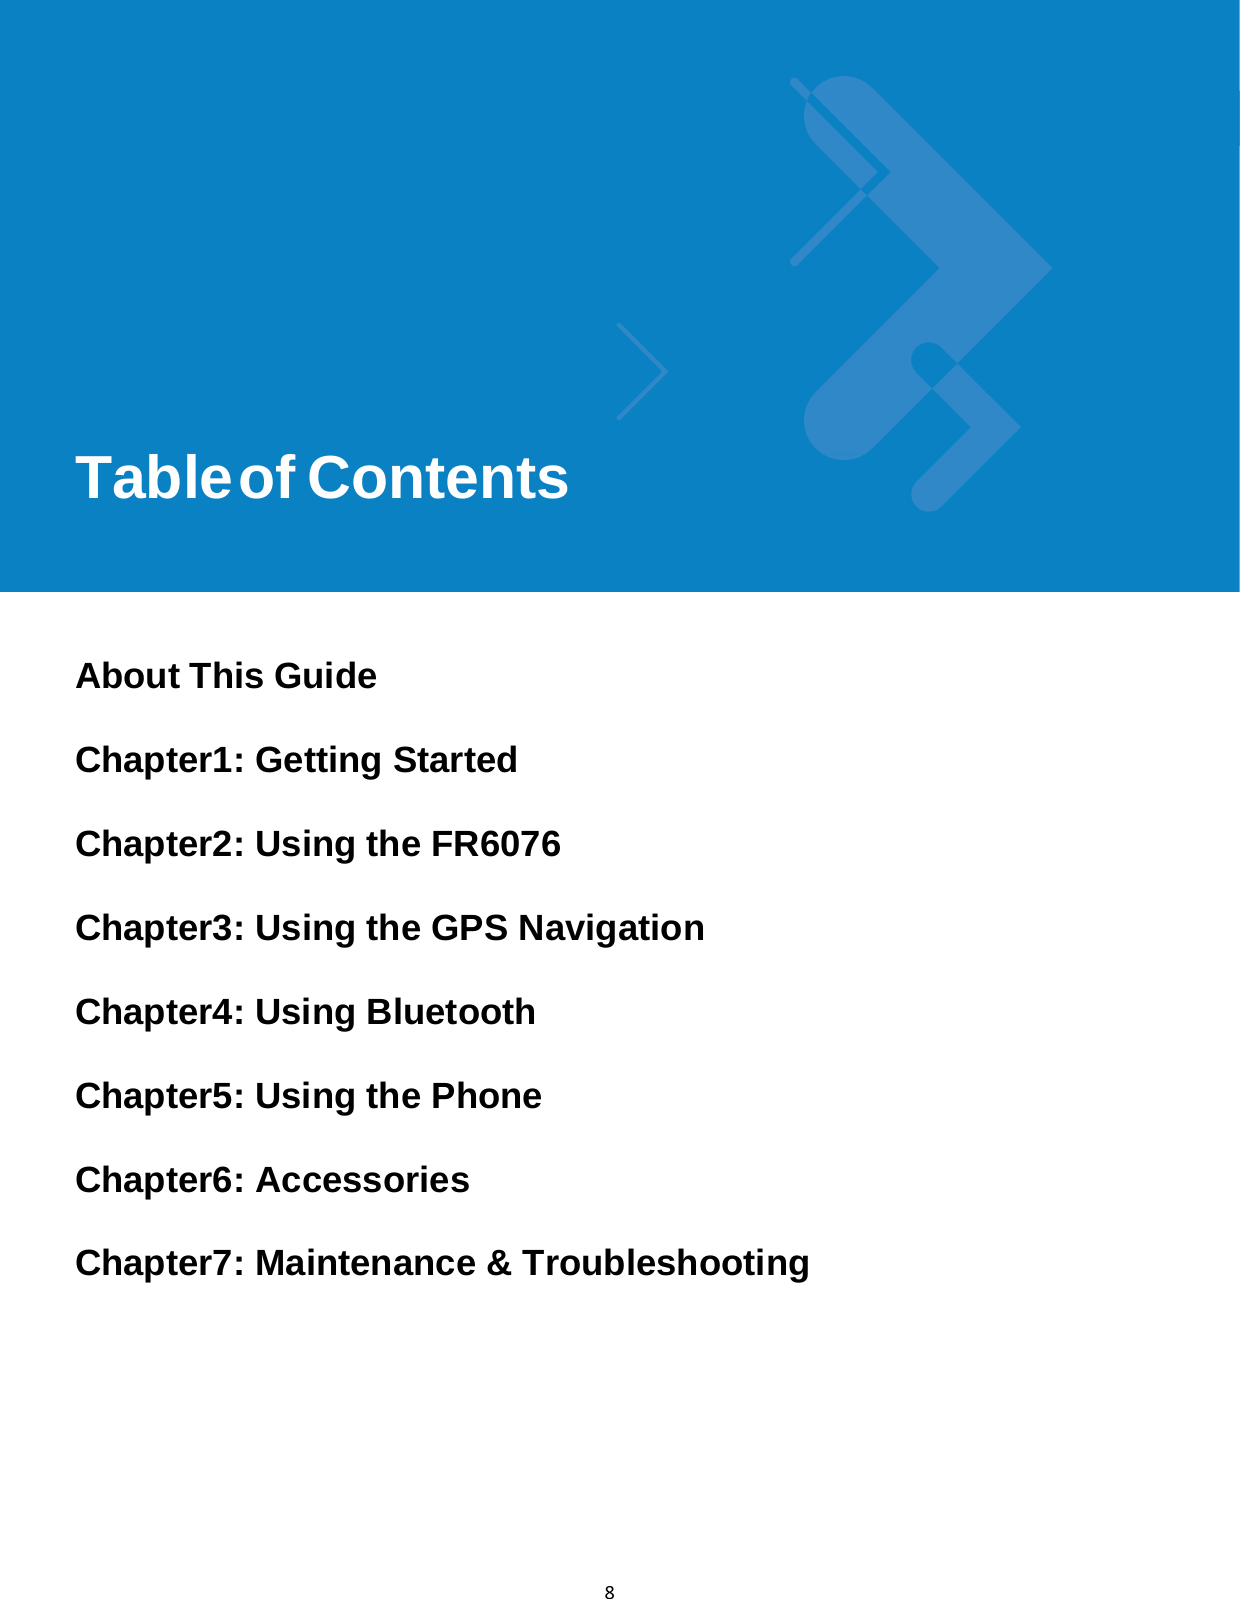 Table of Contentsix 8               Table of Contents        About This Guide  Chapter1: Getting Started  Chapter2: Using the FR6076  Chapter3: Using the GPS Navigation  Chapter4: Using Bluetooth  Chapter5: Using the Phone  Chapter6: Accessories  Chapter7: Maintenance &amp; Troubleshooting      